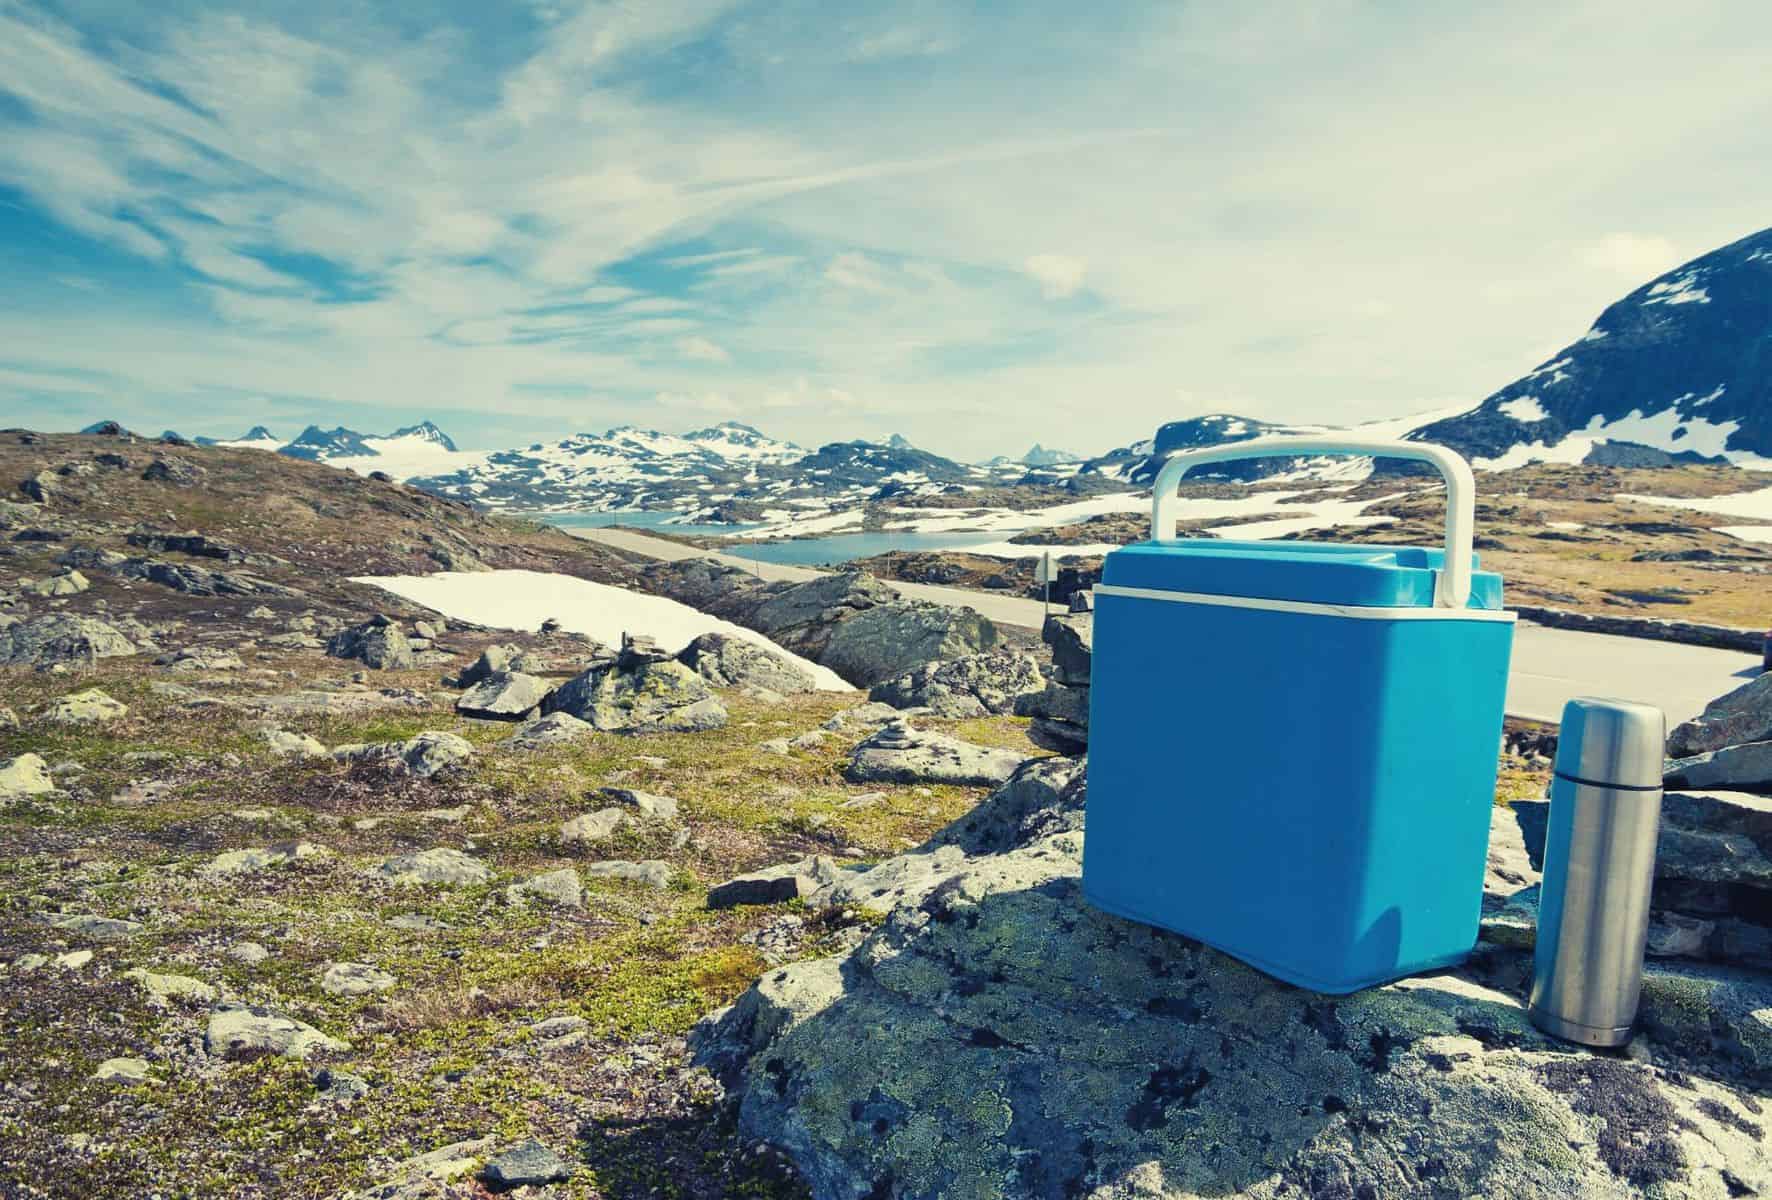 Cooler sitting on rocks in a mountaineous region